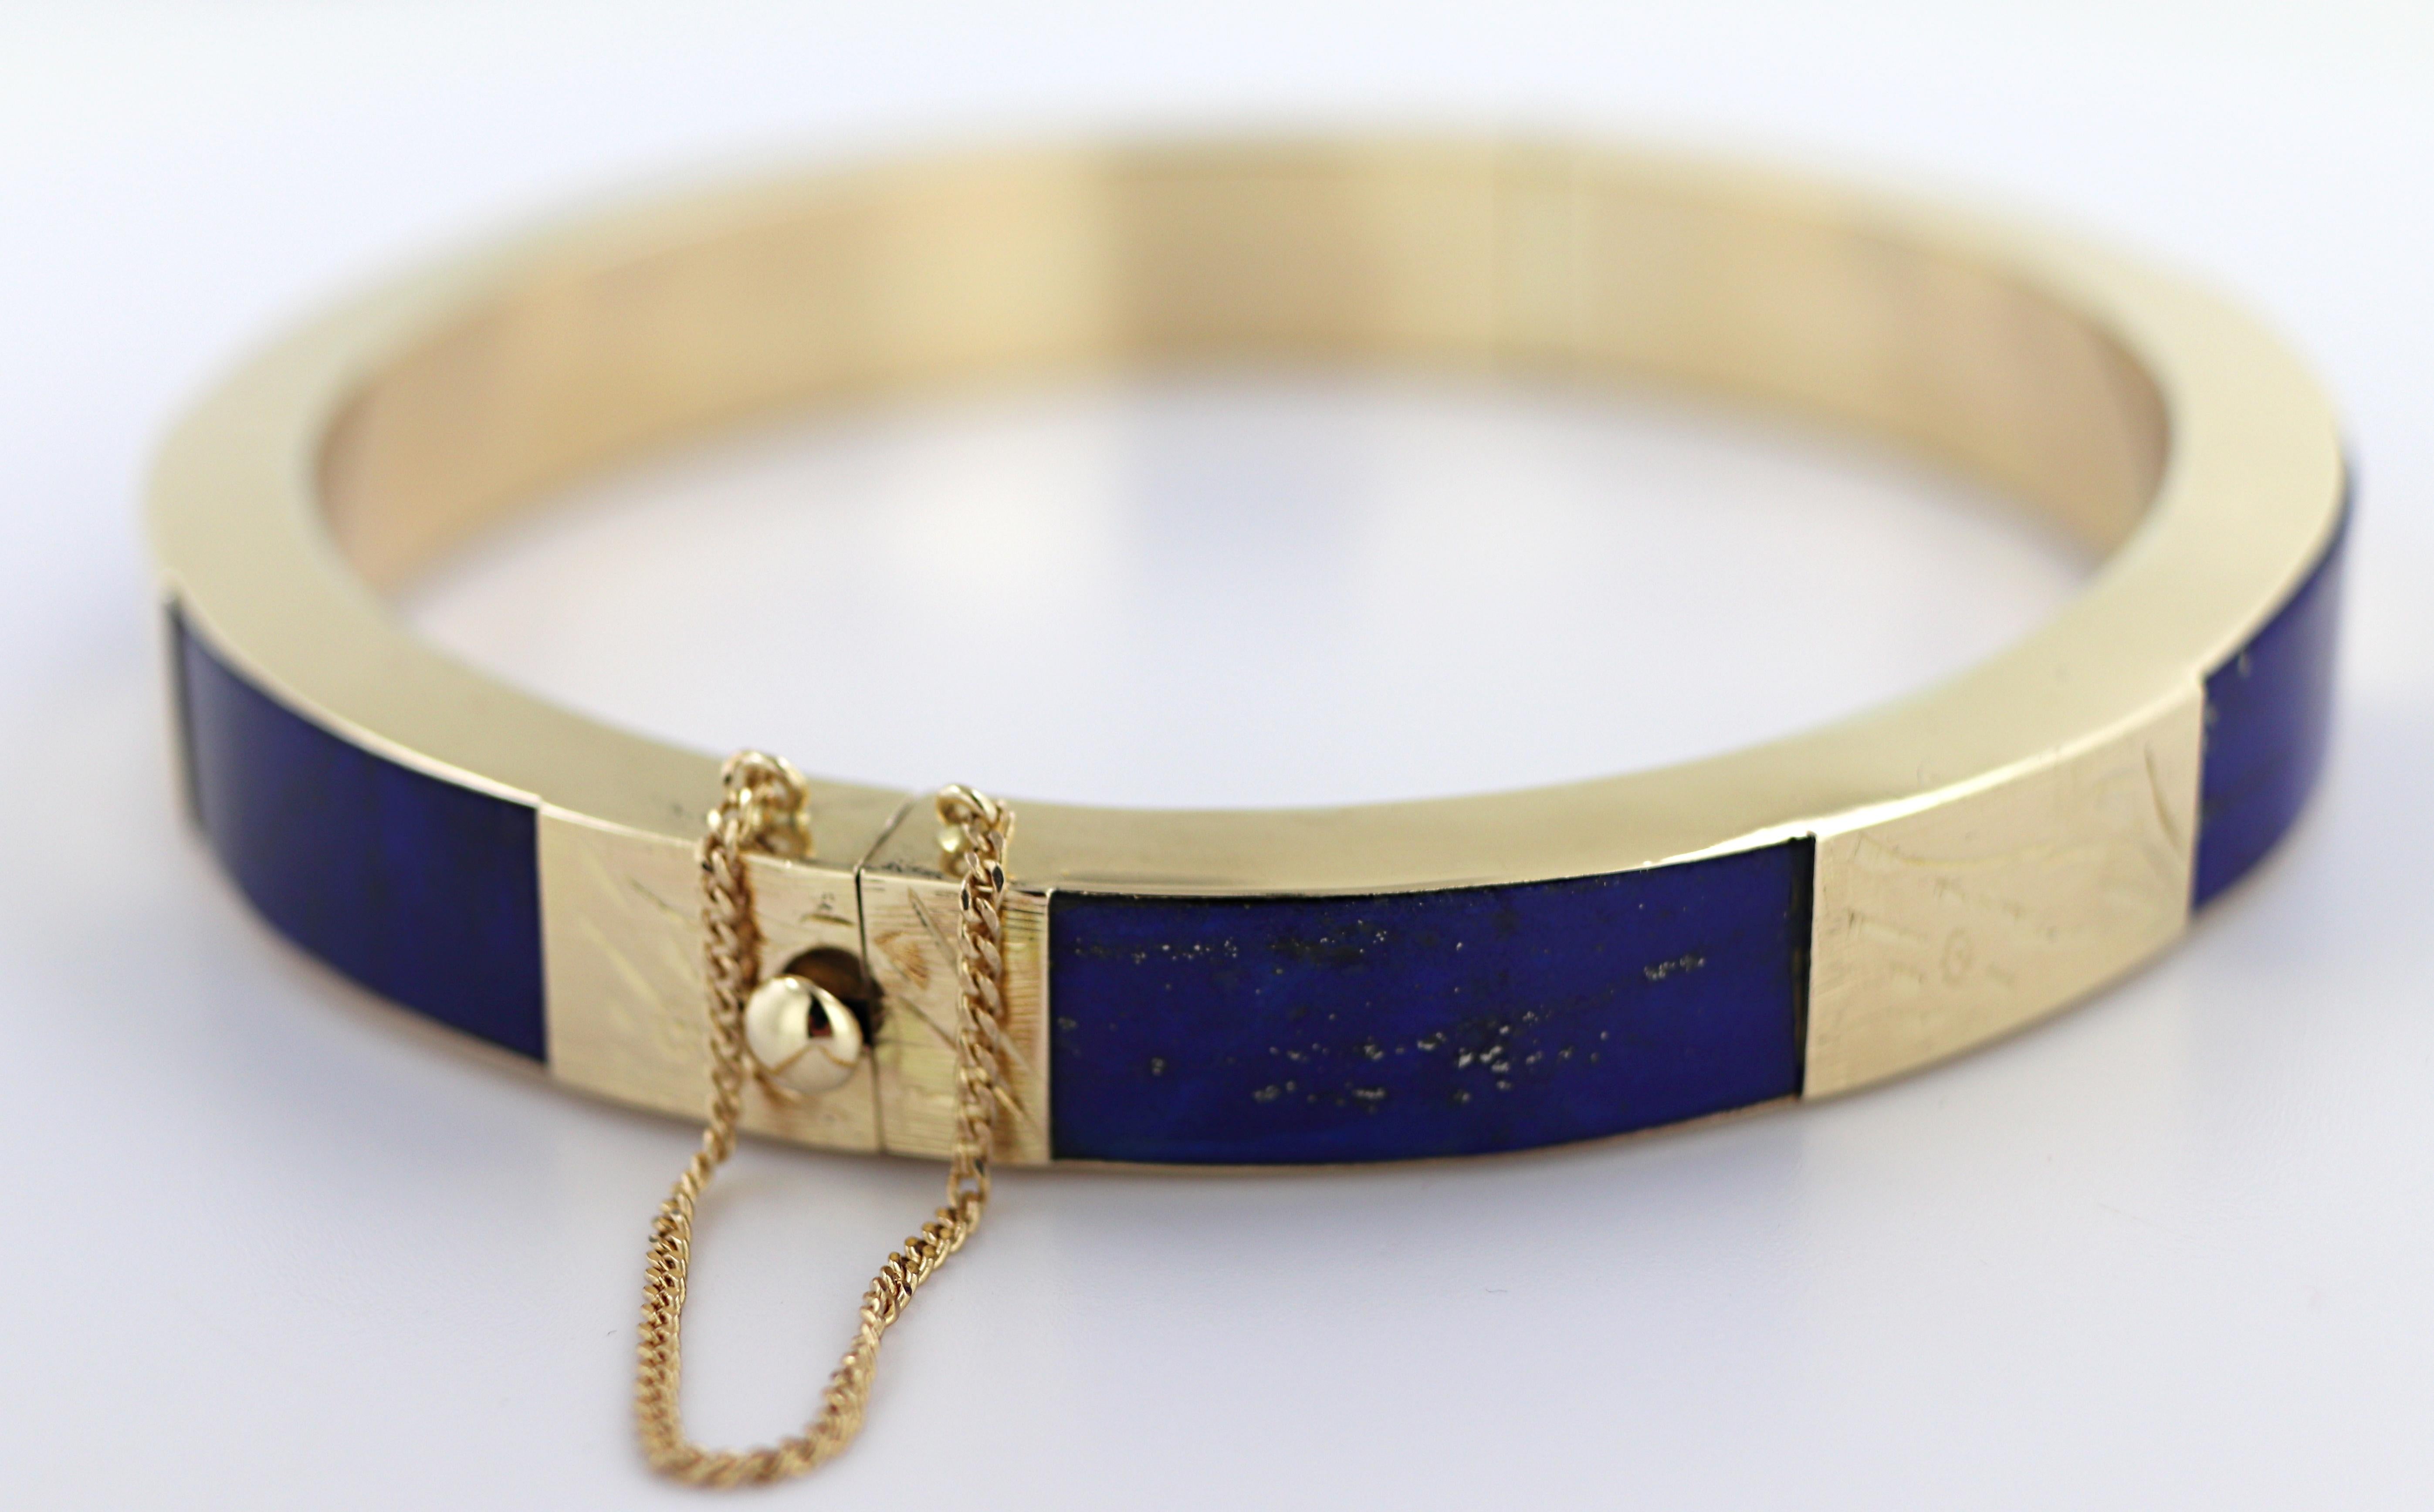 Featuring (6) inlaid segments of Lapis lazuli, 19.1. X 6.8 mm, interspaced and set in a foliate engraved
14k yellow gold hinged bangle mounting, 8.7 X 4.8 mm, 56.7 mm widest internal diameter, completed
with a pressure locking clasp and safety